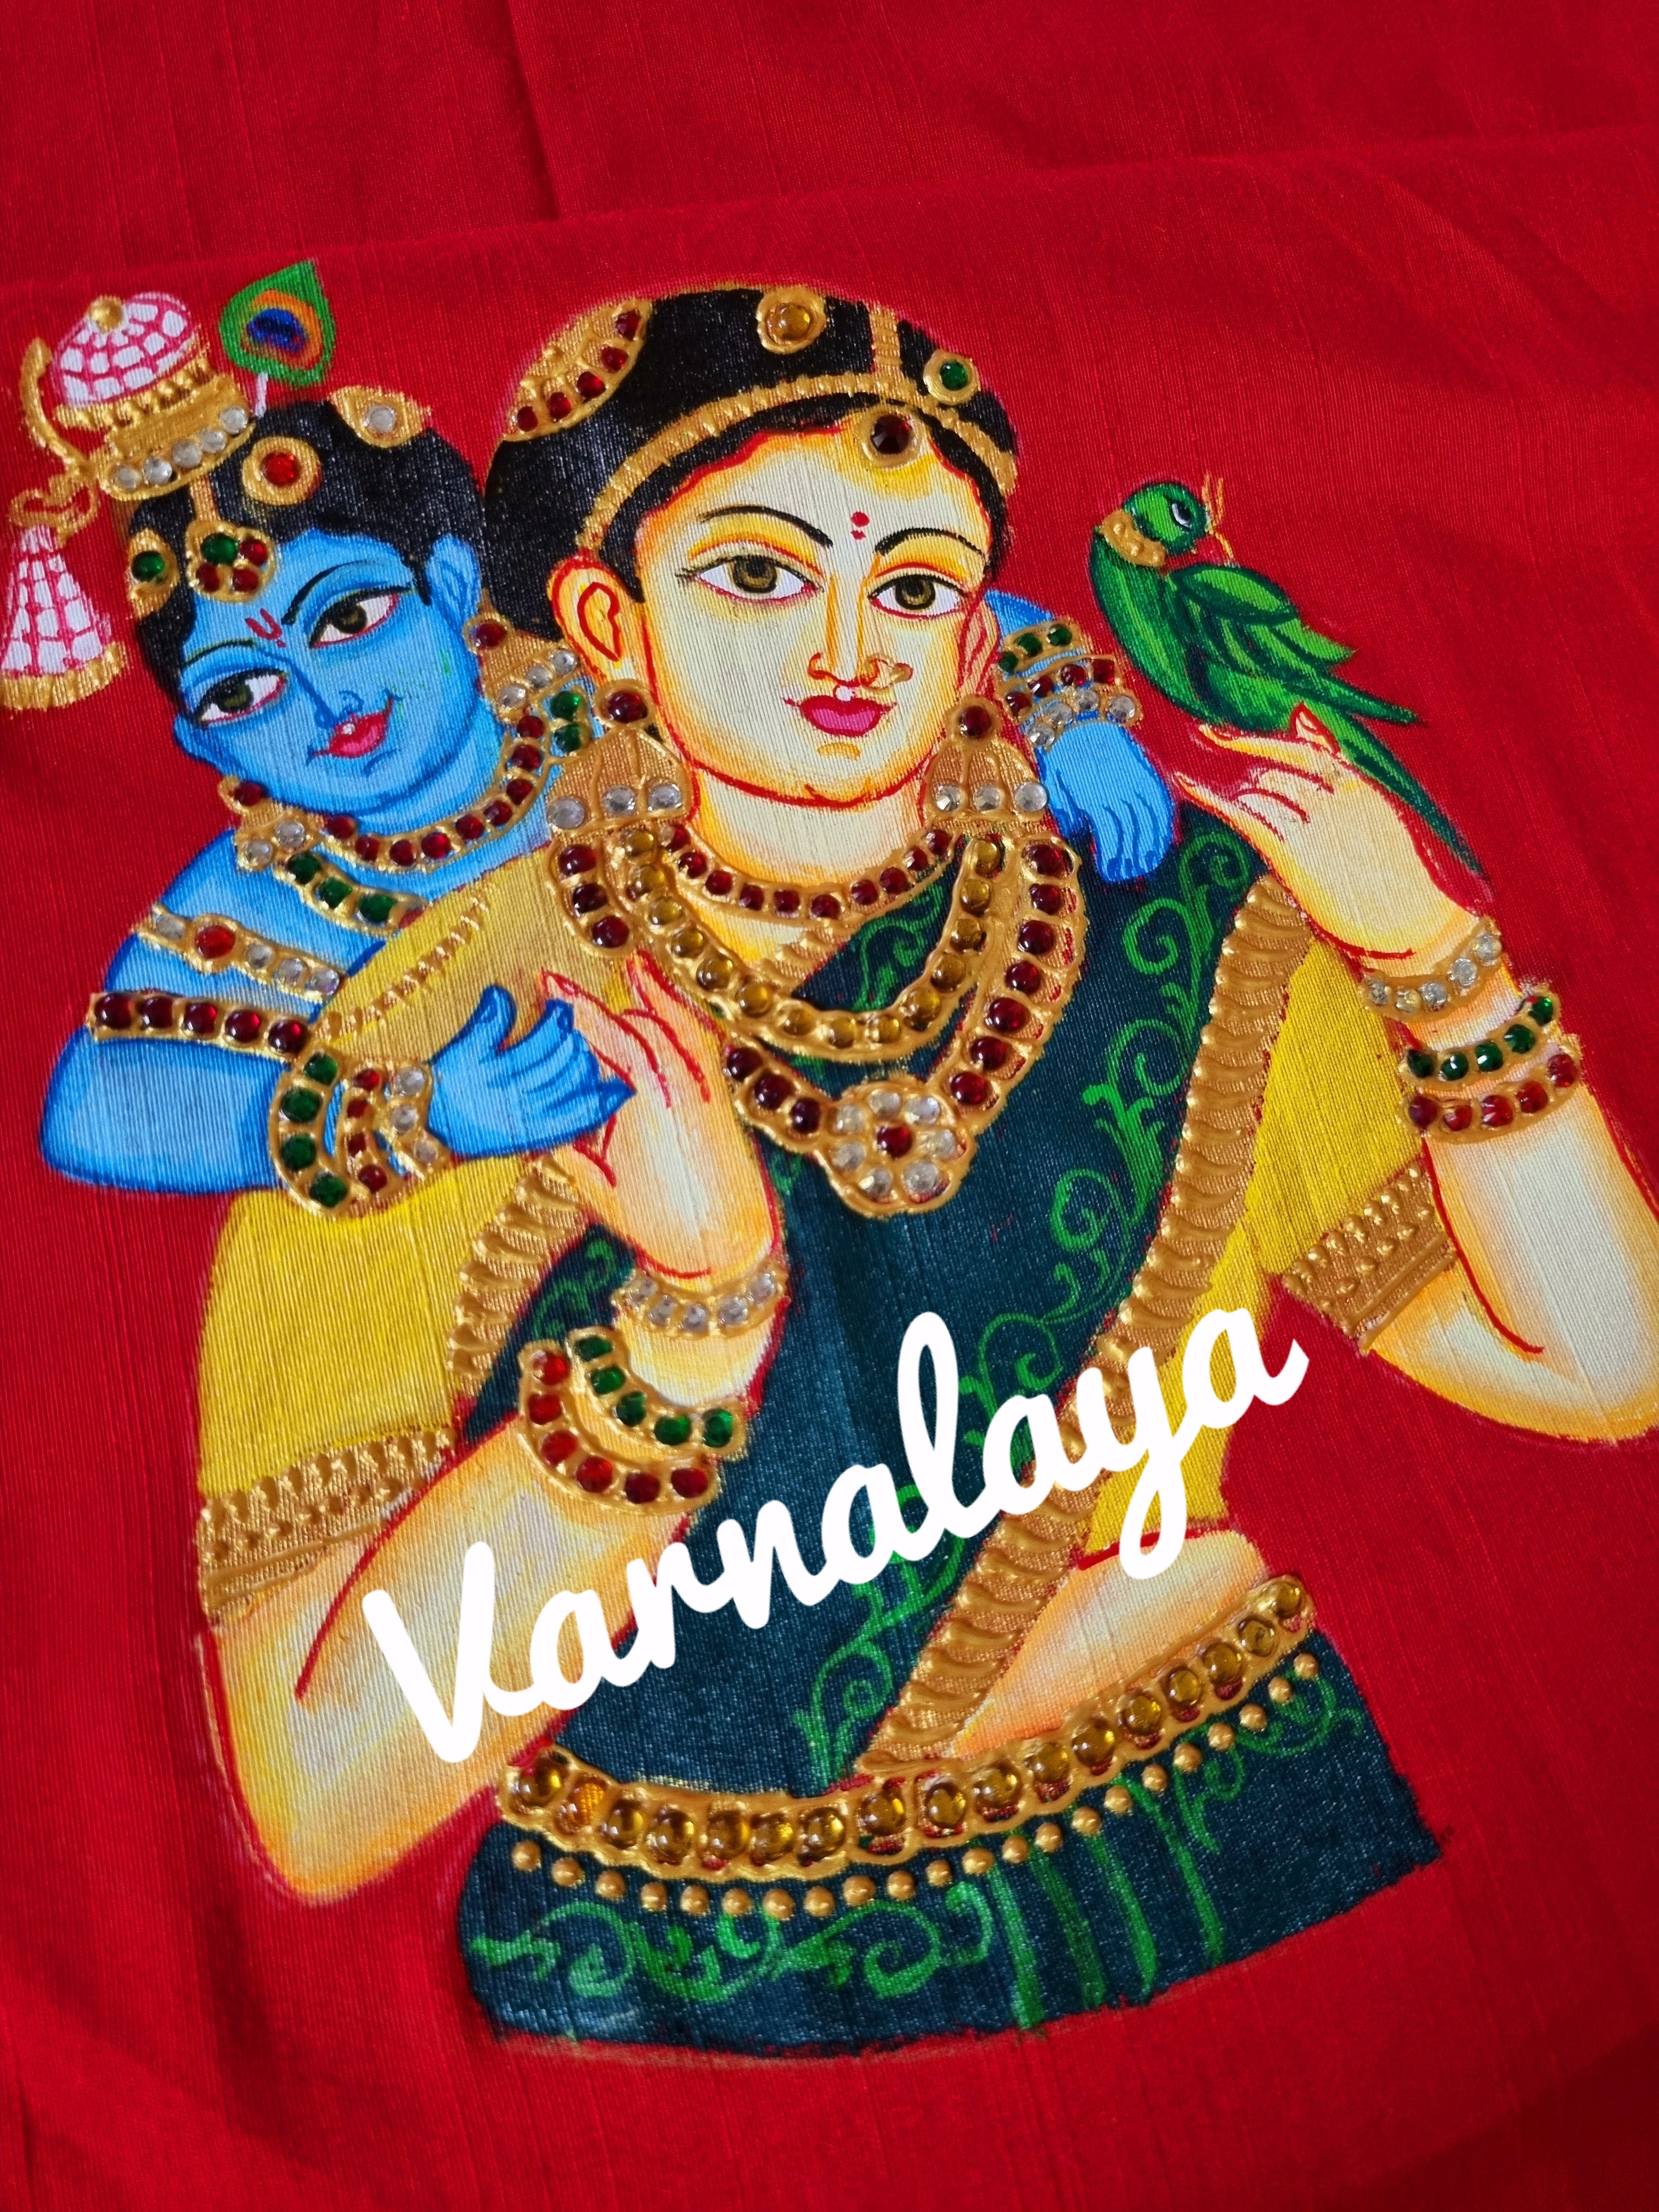 Designs of Tanjore Art on Fabric